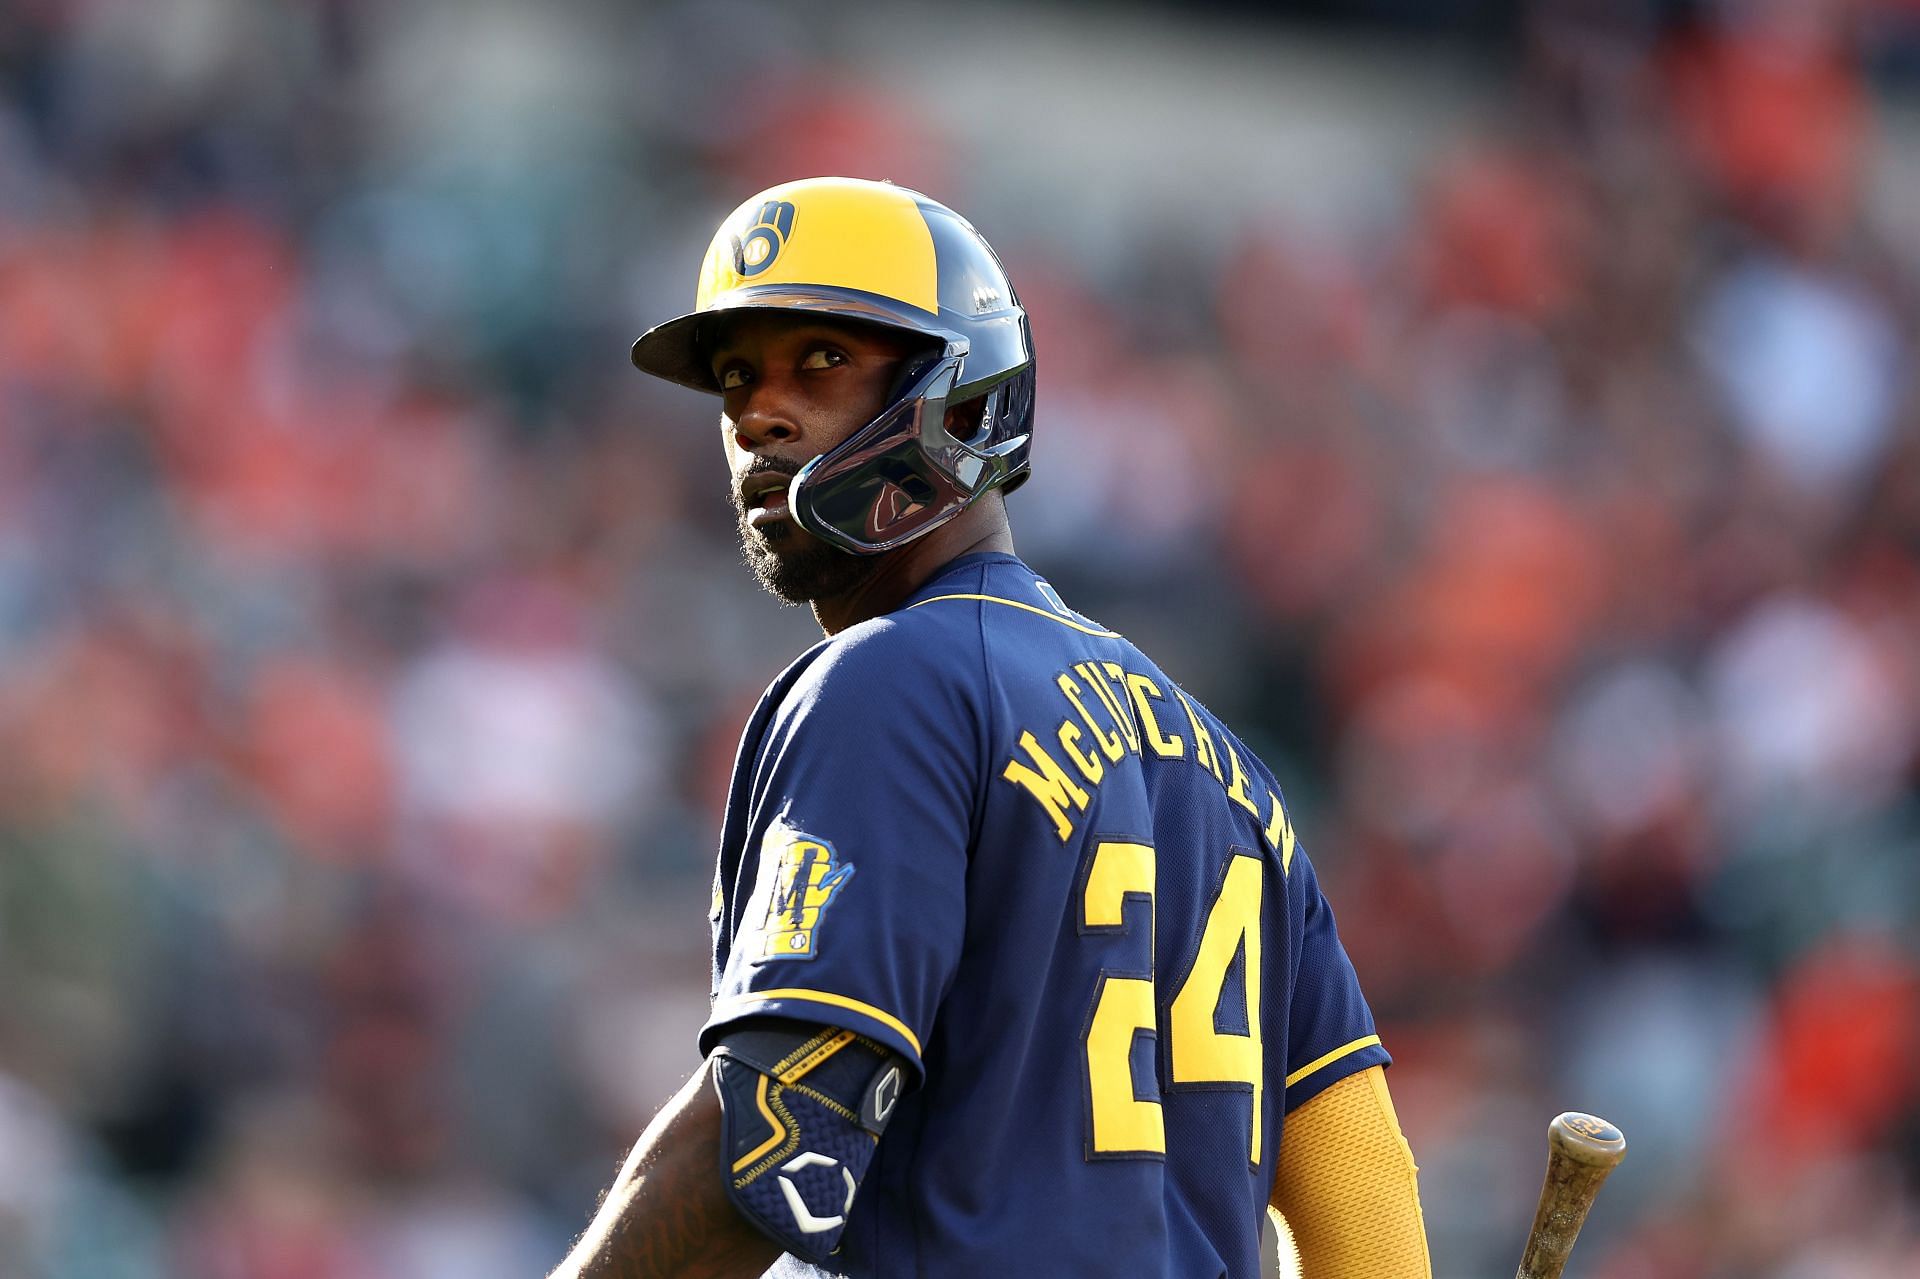 Brewers spring training: Andrew McCutchen joins team